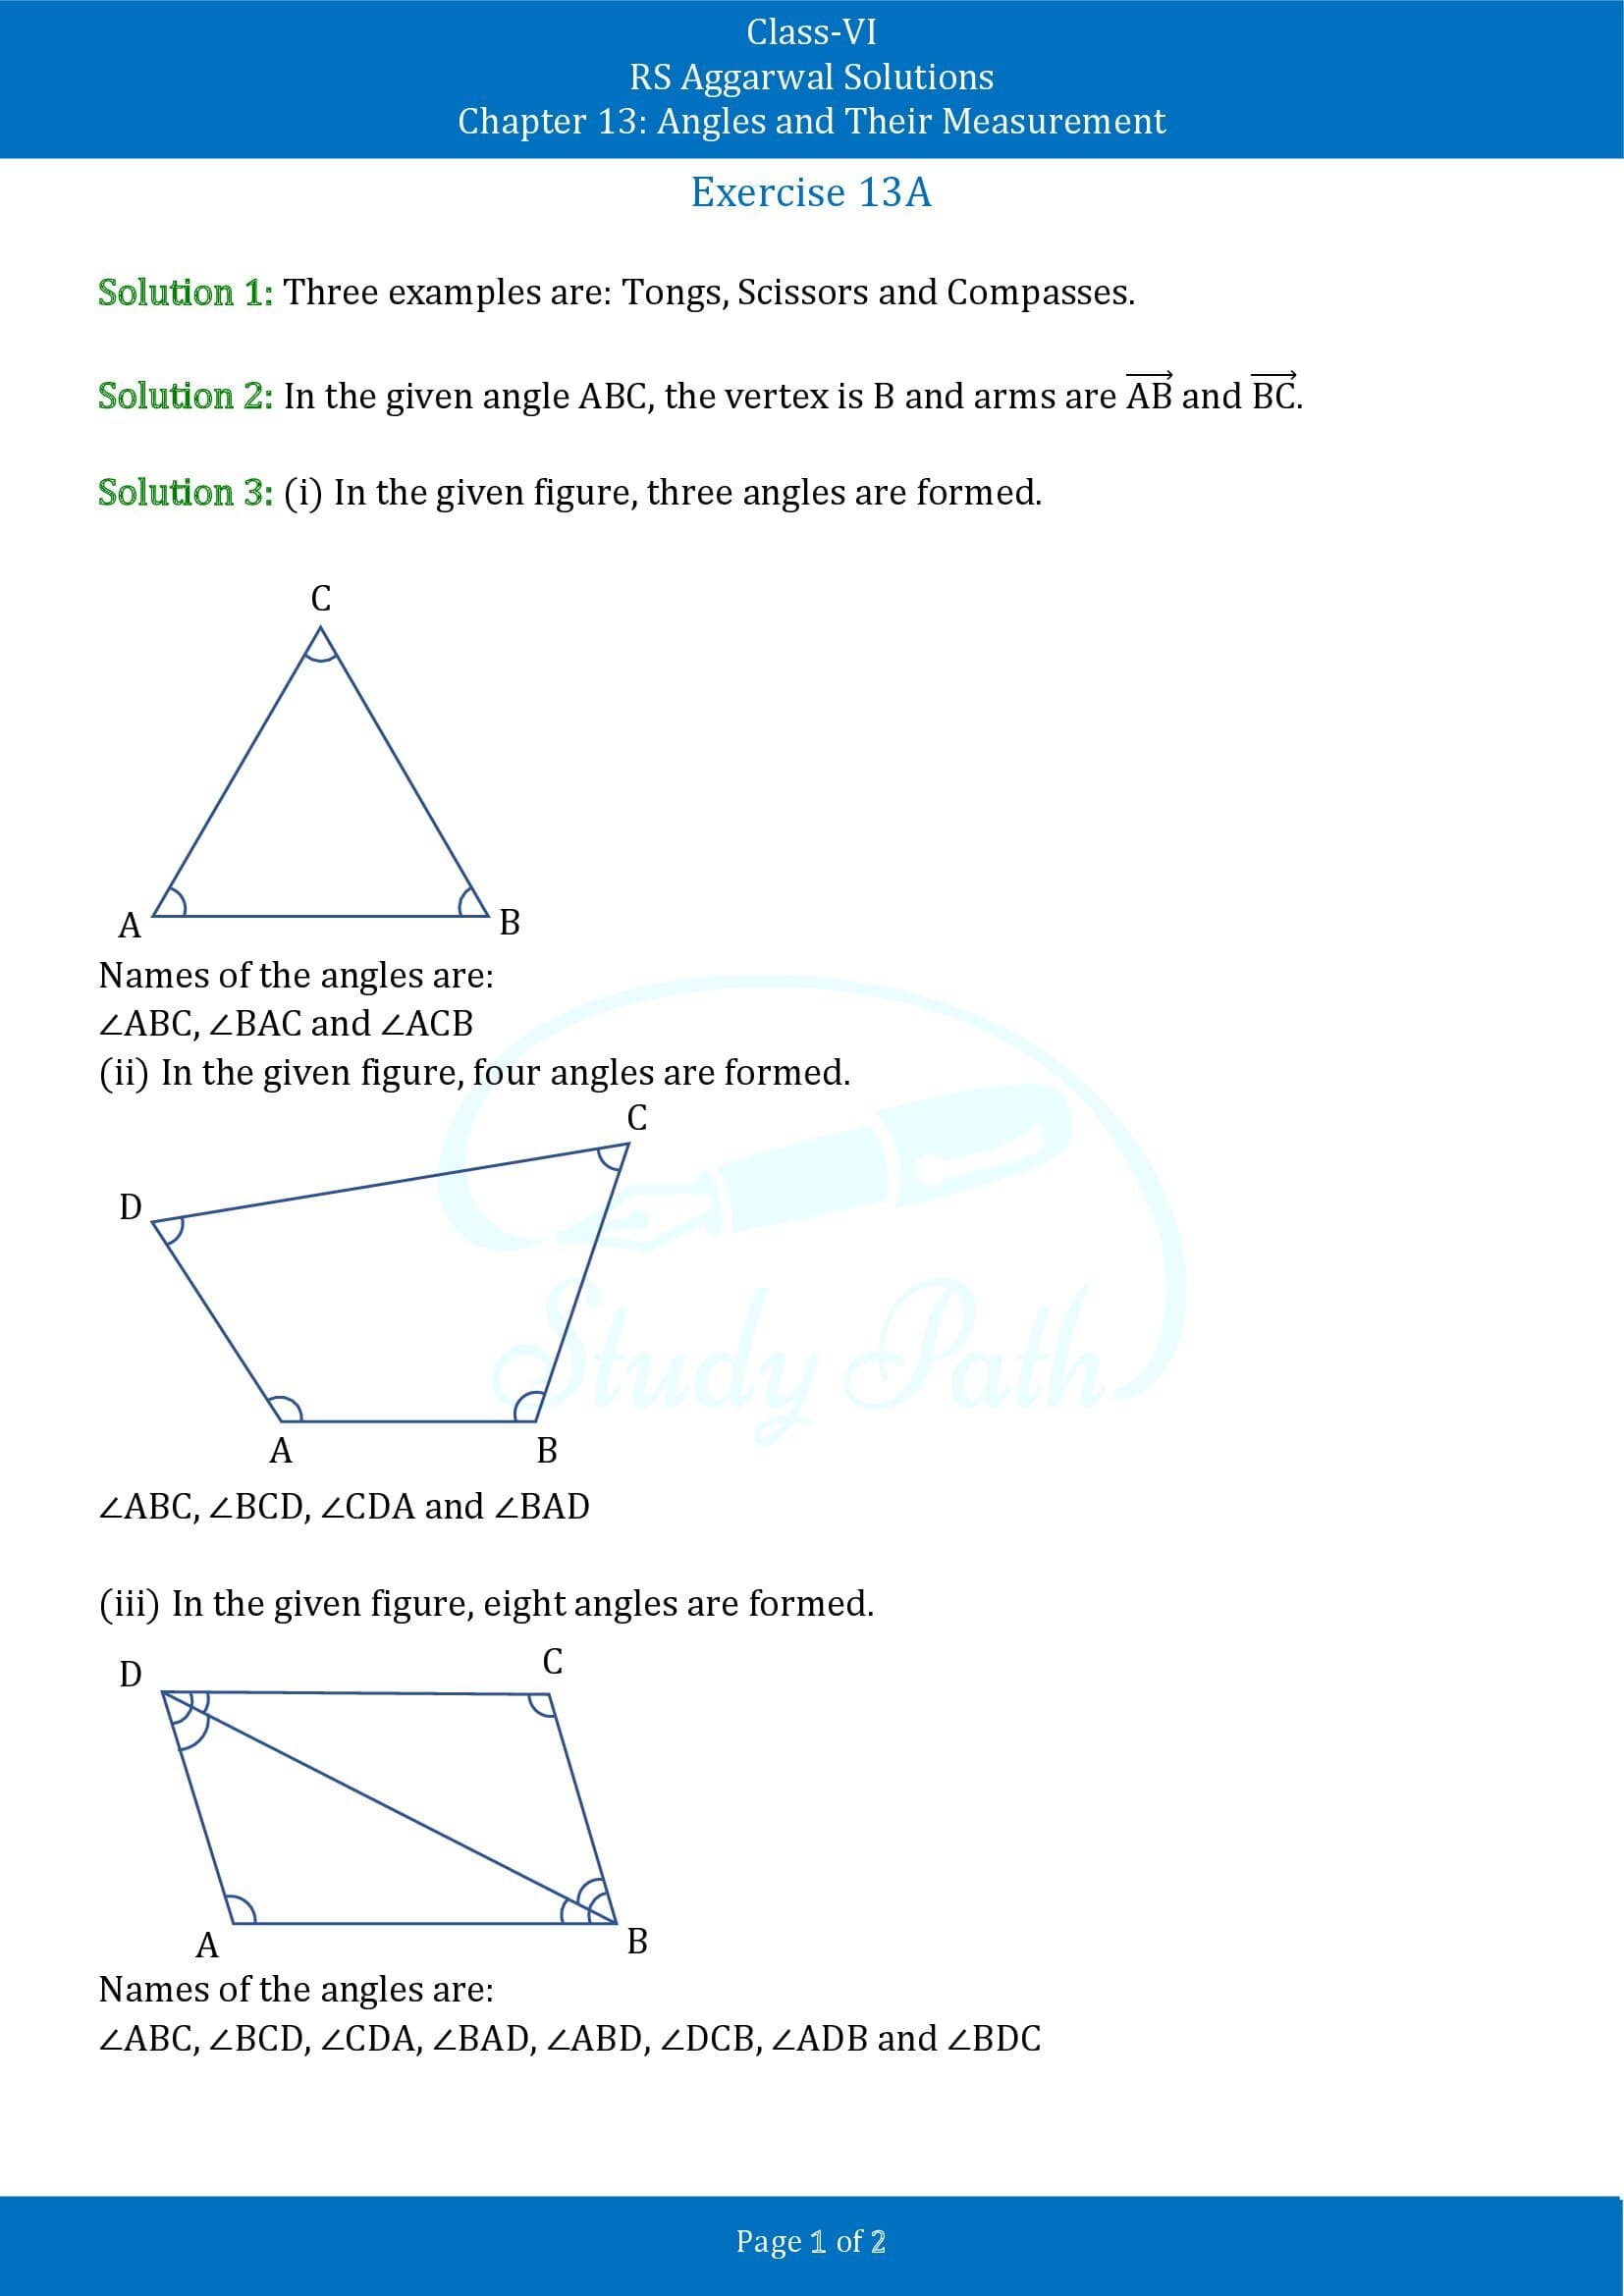 RS Aggarwal Solutions Class 6 Chapter 13 Angles and Their Measurement Exercise 13A 00001